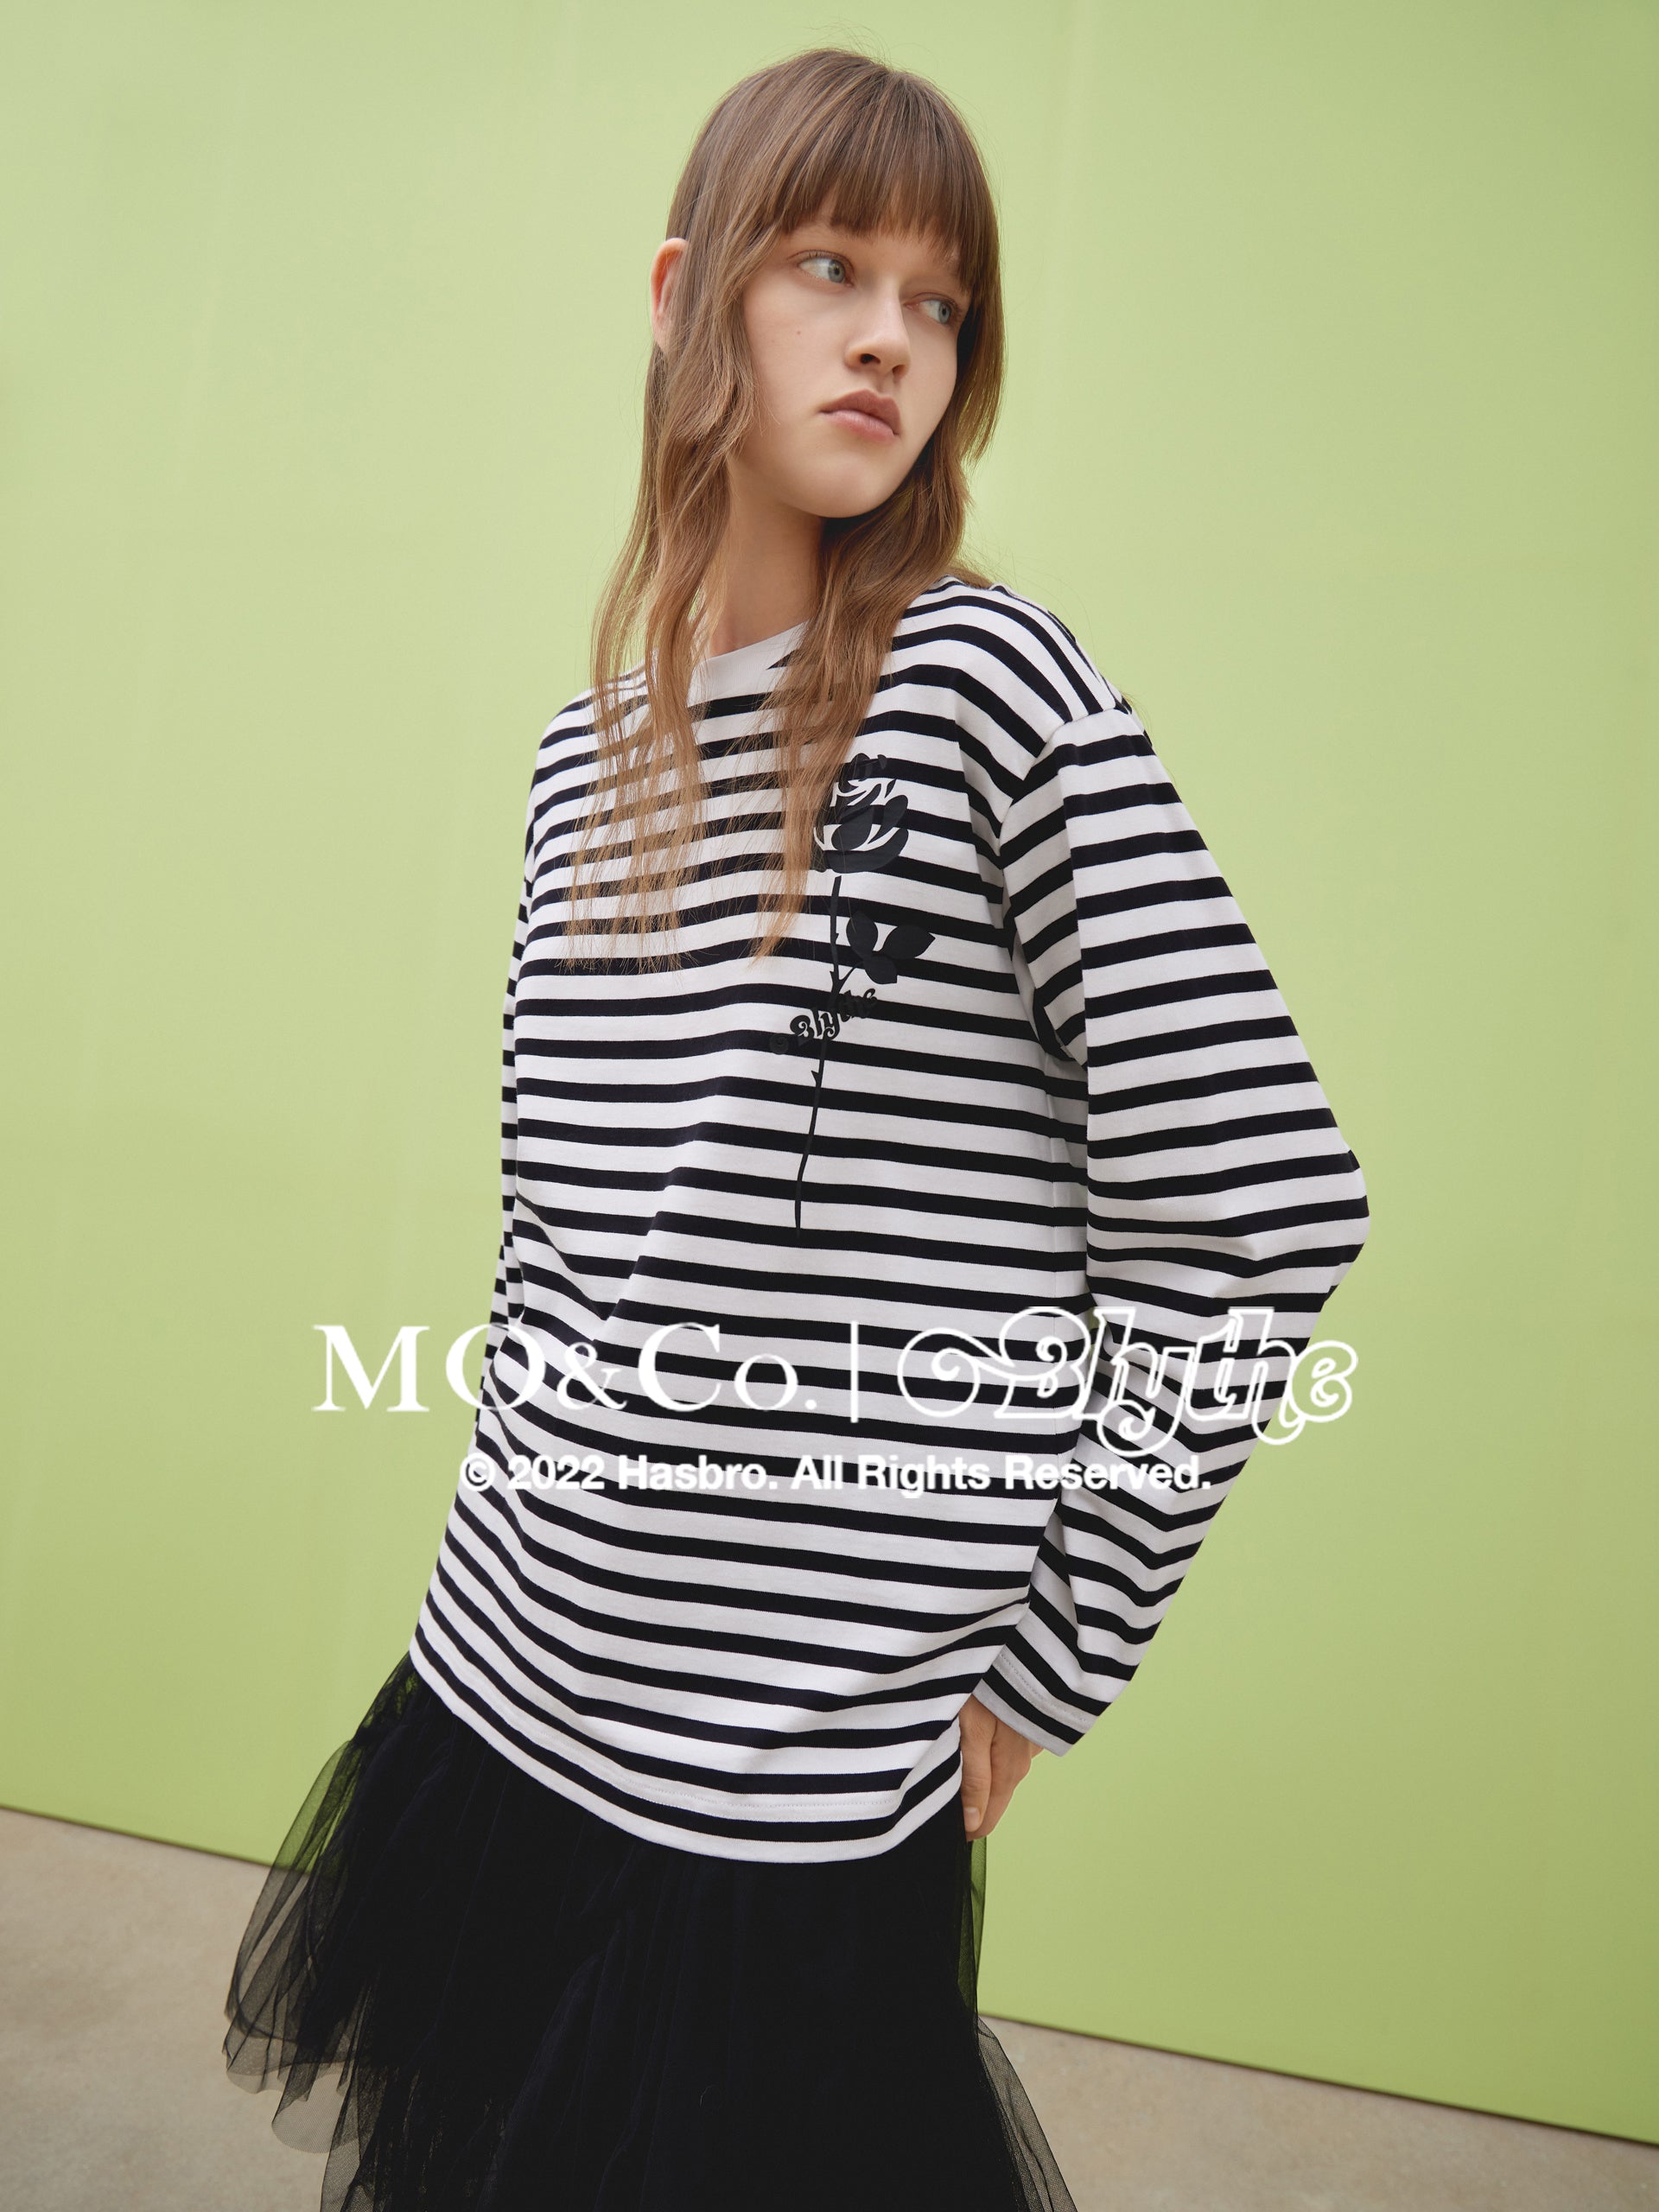 MO&Co.｜Blythe Collaboration Striped Rose Print Cotton T-Shirt Loose Casual Round Neck  Striped T Shirt